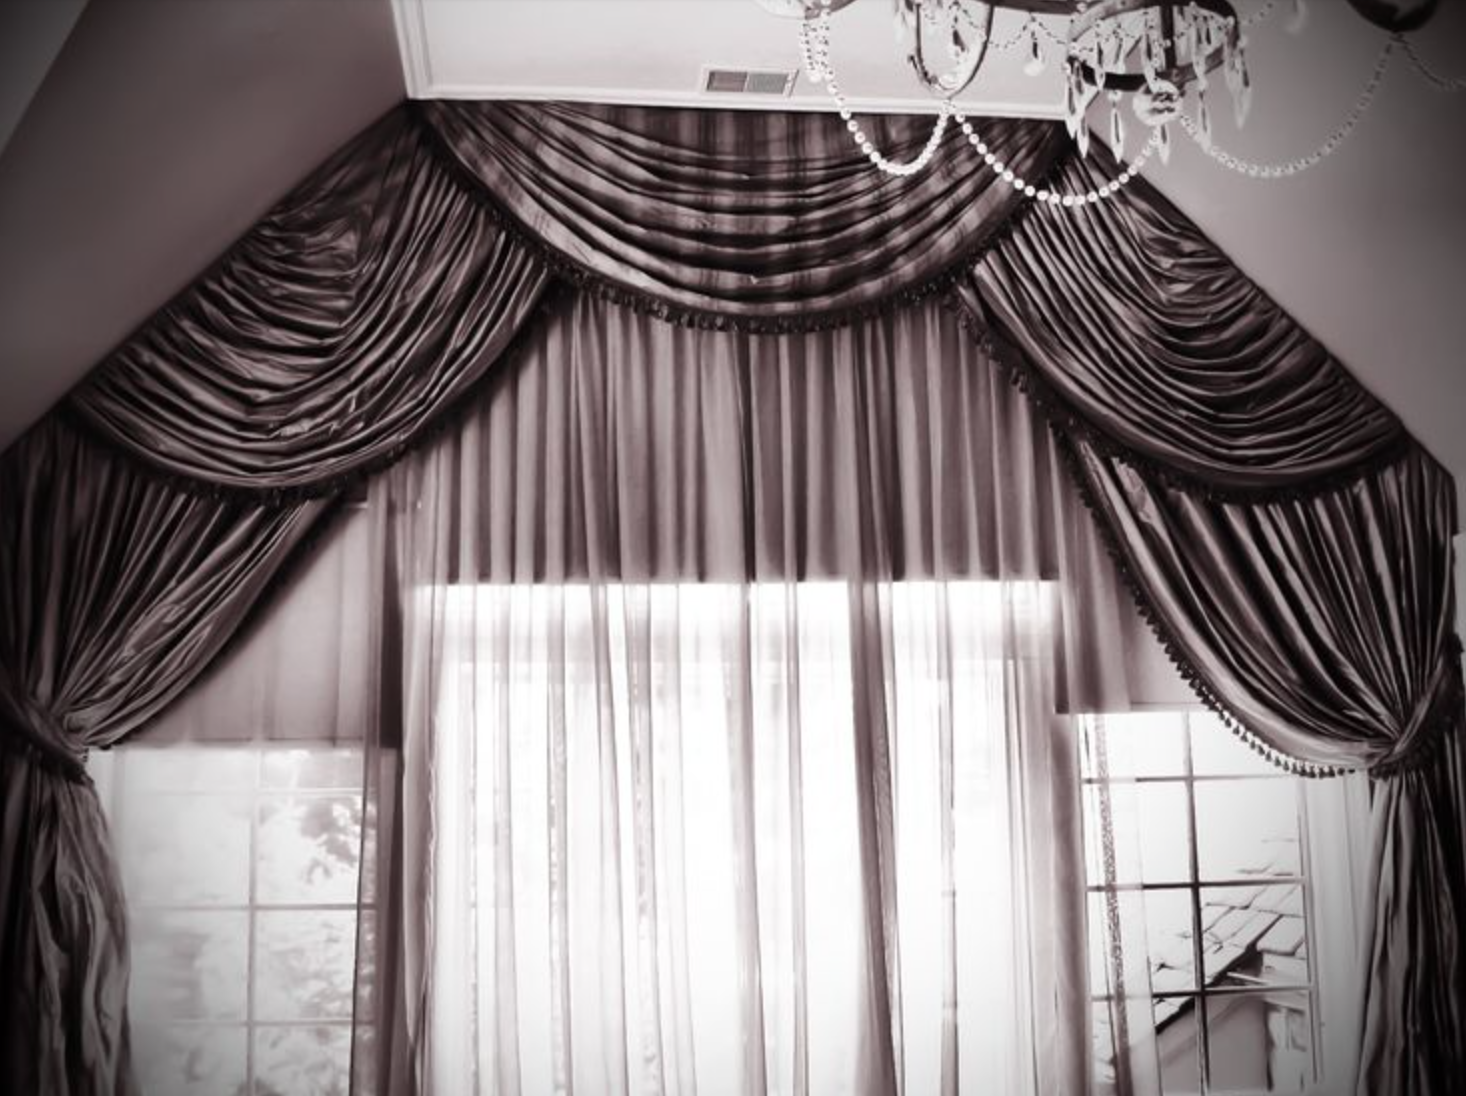 Curtains and Drapes - Interior Designers, Architects, NYC